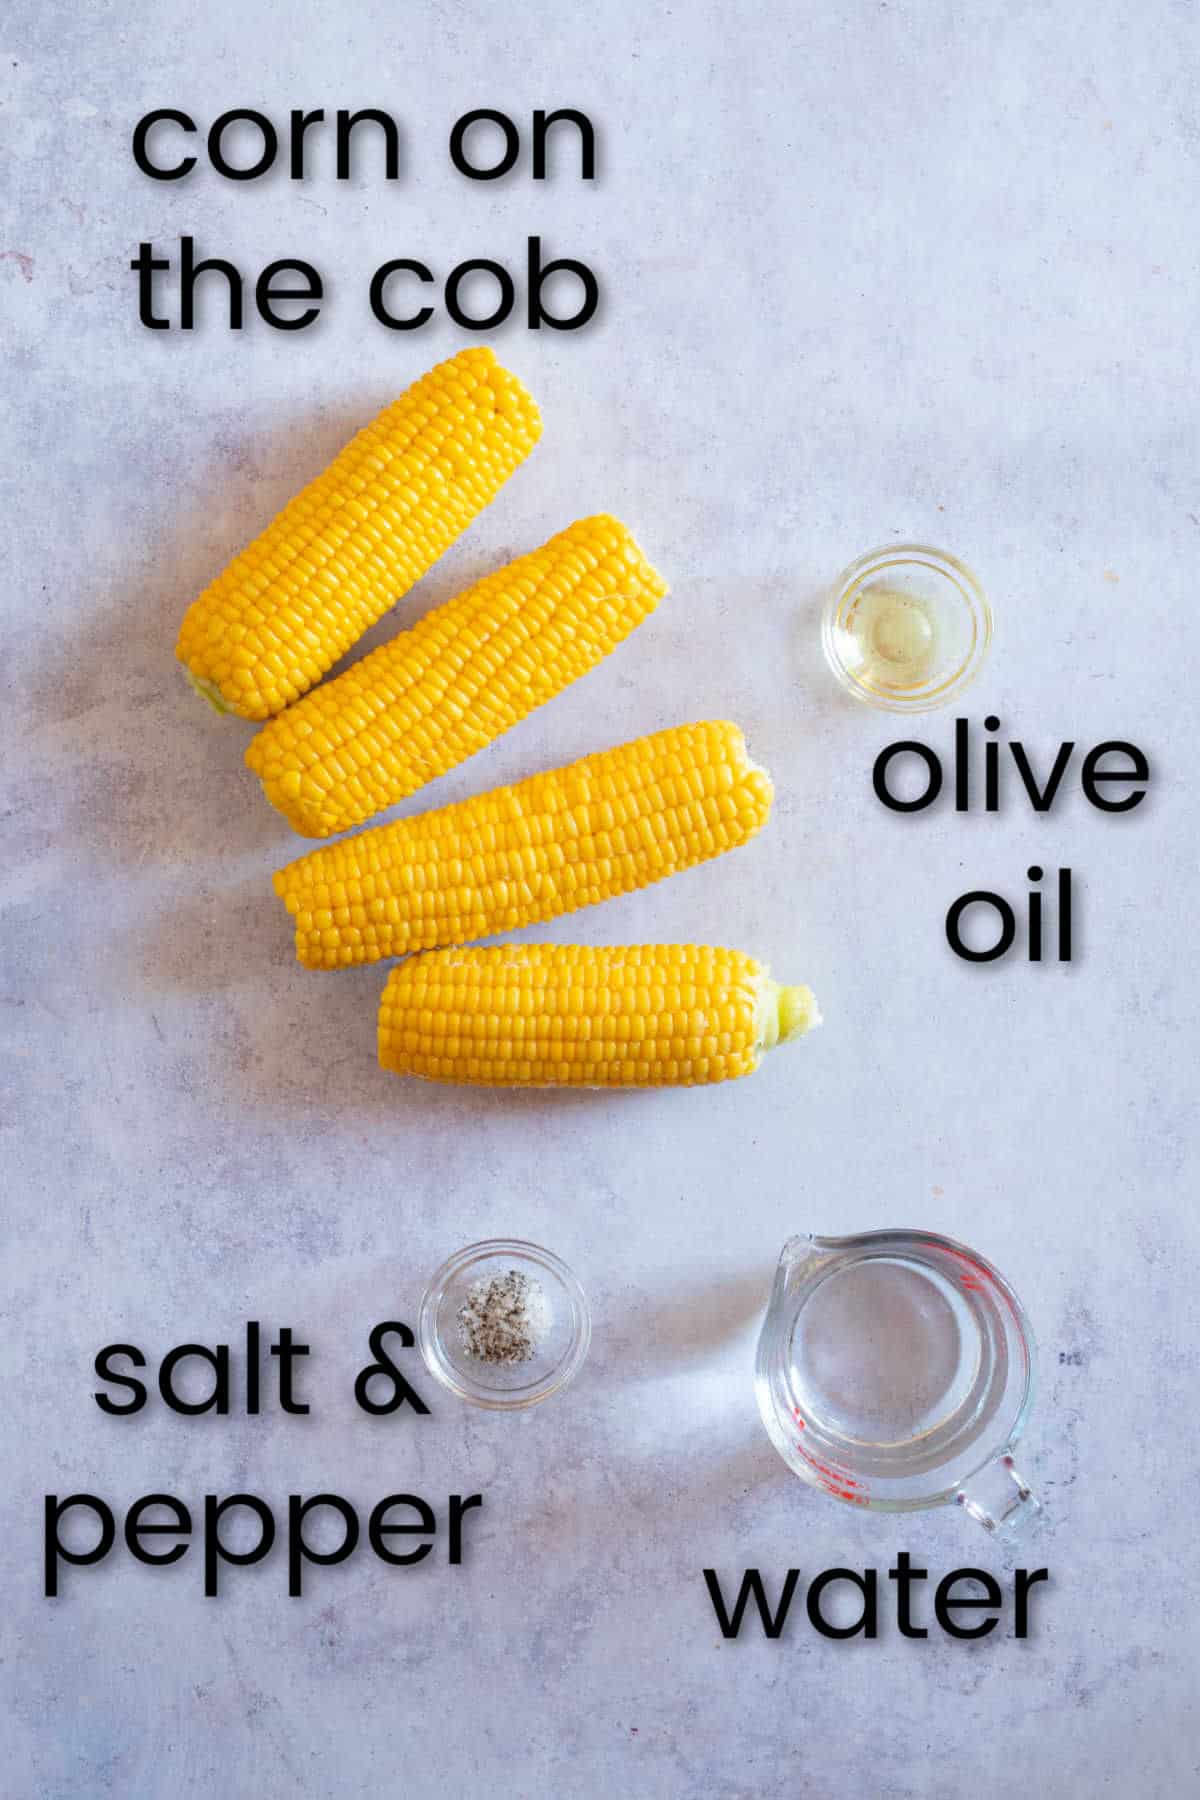 Ingredients for slow cooker corn on the cob.